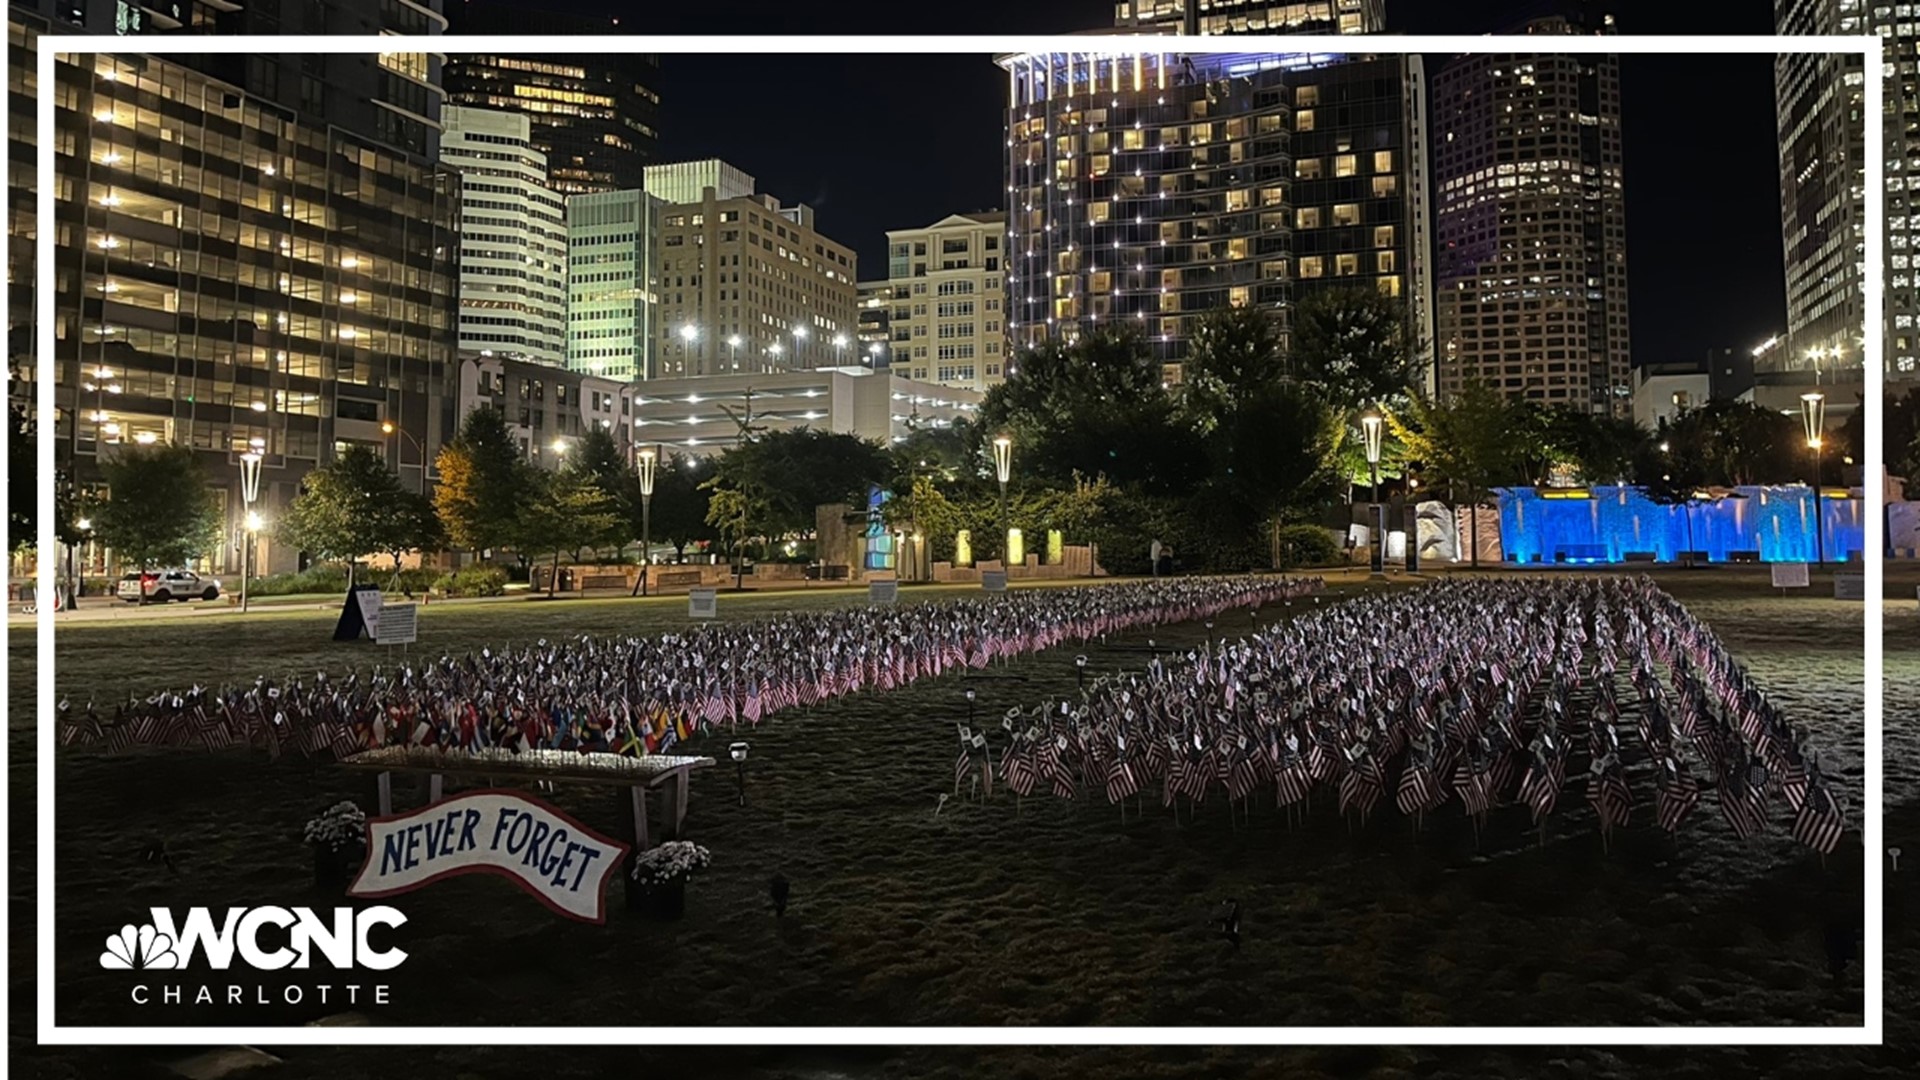 In Uptown Charlotte, nearly 3,000 American flags are on display. Each represents someone who lost their life on 9/11.